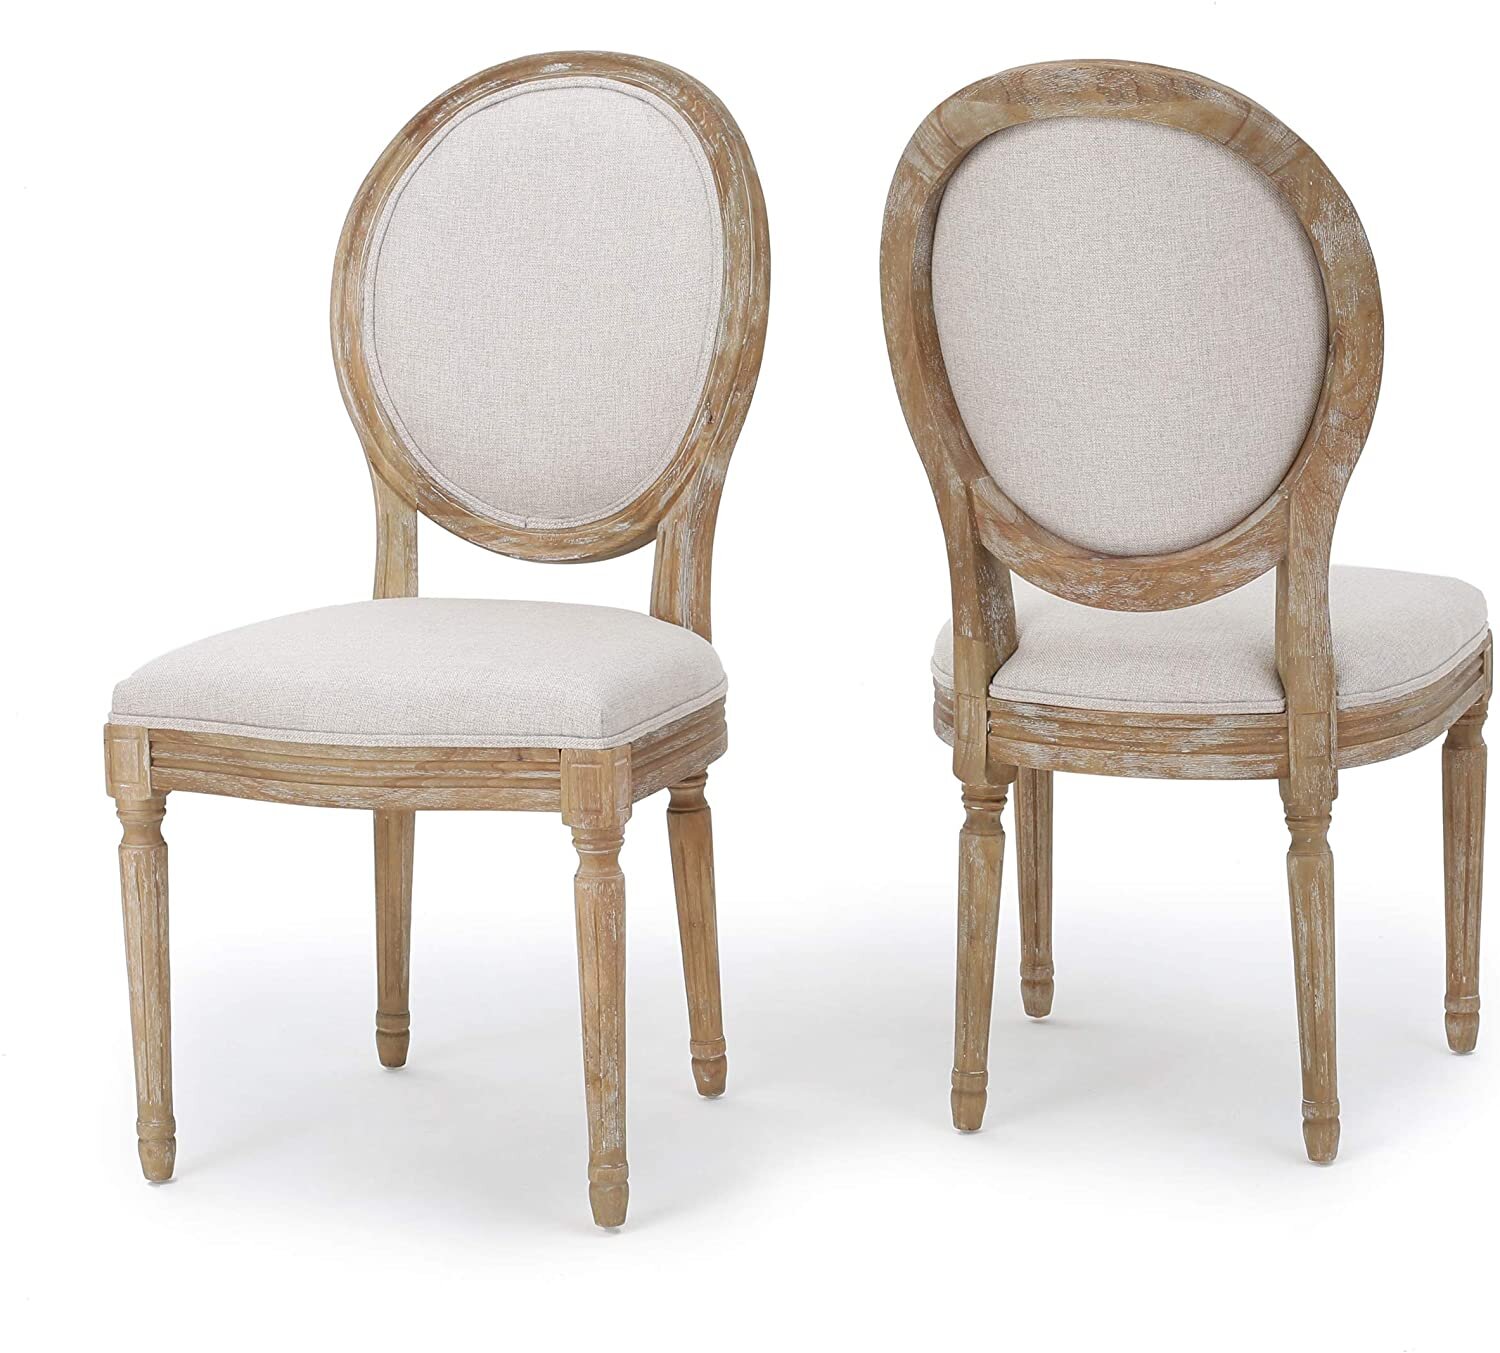 louis chairs with arms